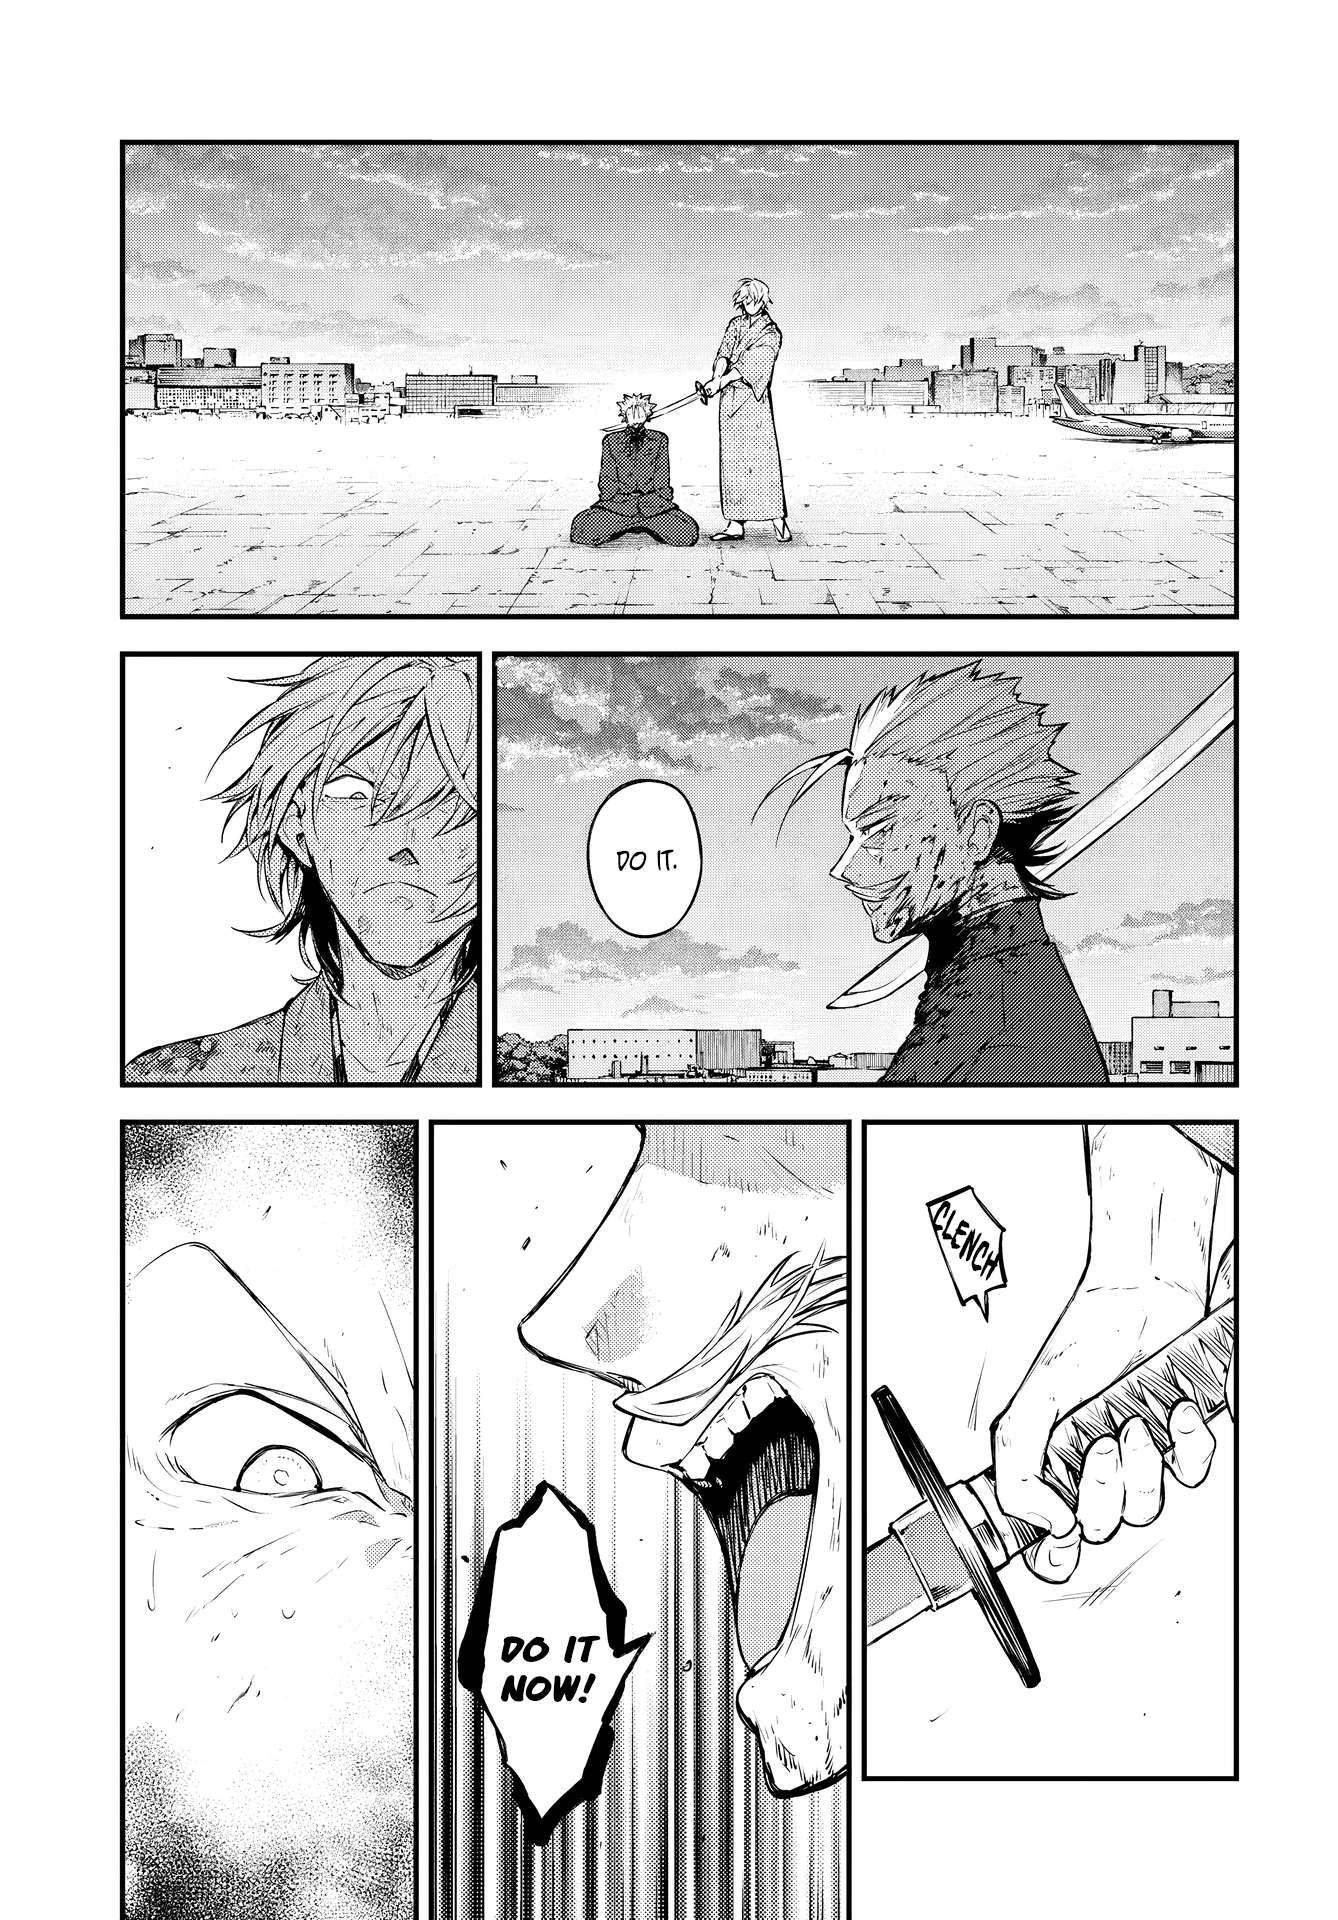 Bungo Stray Dogs chapter 113 page 21